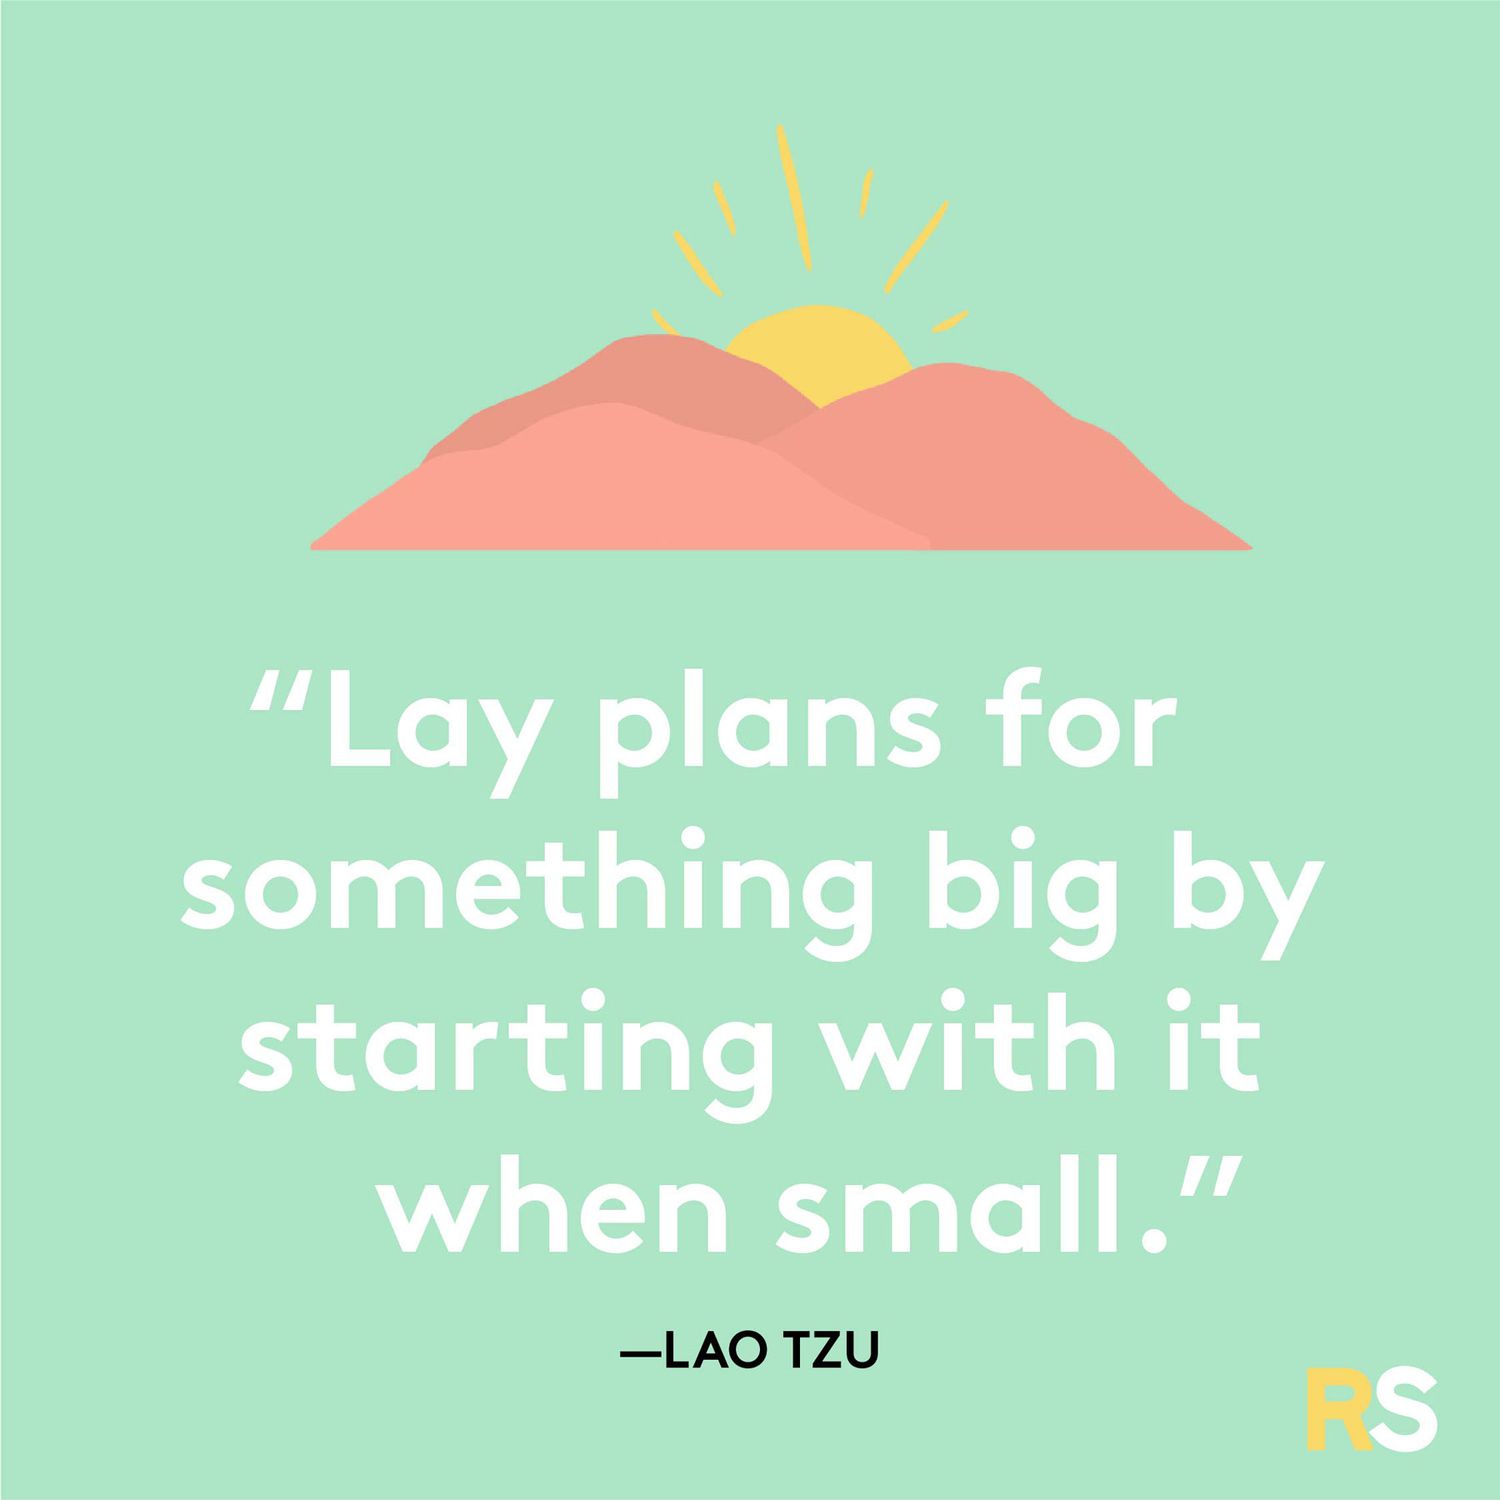 Lay plans for something big by starting with it when small.